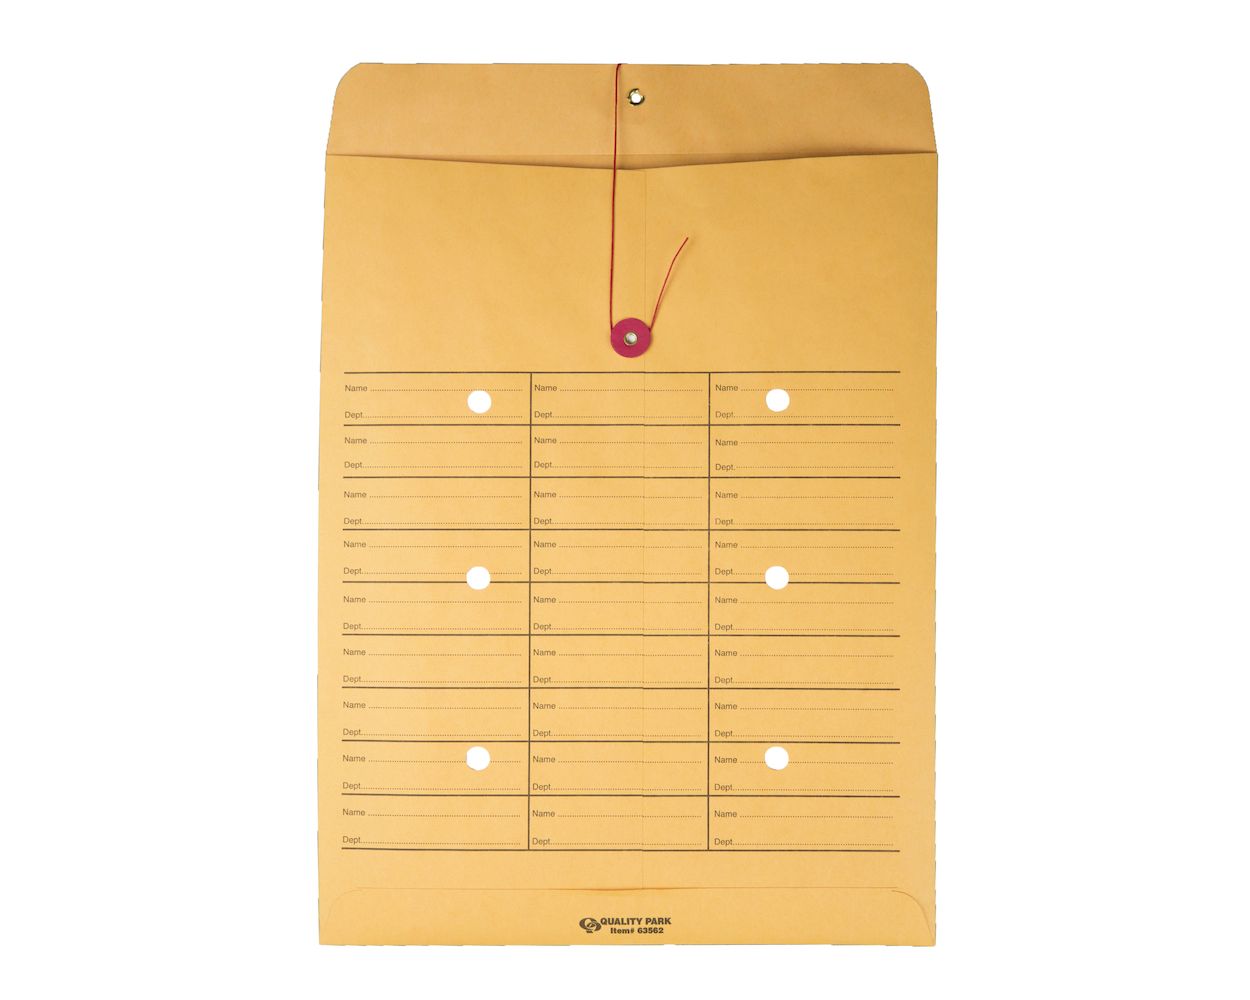 10 x 13 Inter-Departmental Envelopes with String & Button Closure for  Interoffice Routing, 28 lb. Brown Kraft, 100 per Box